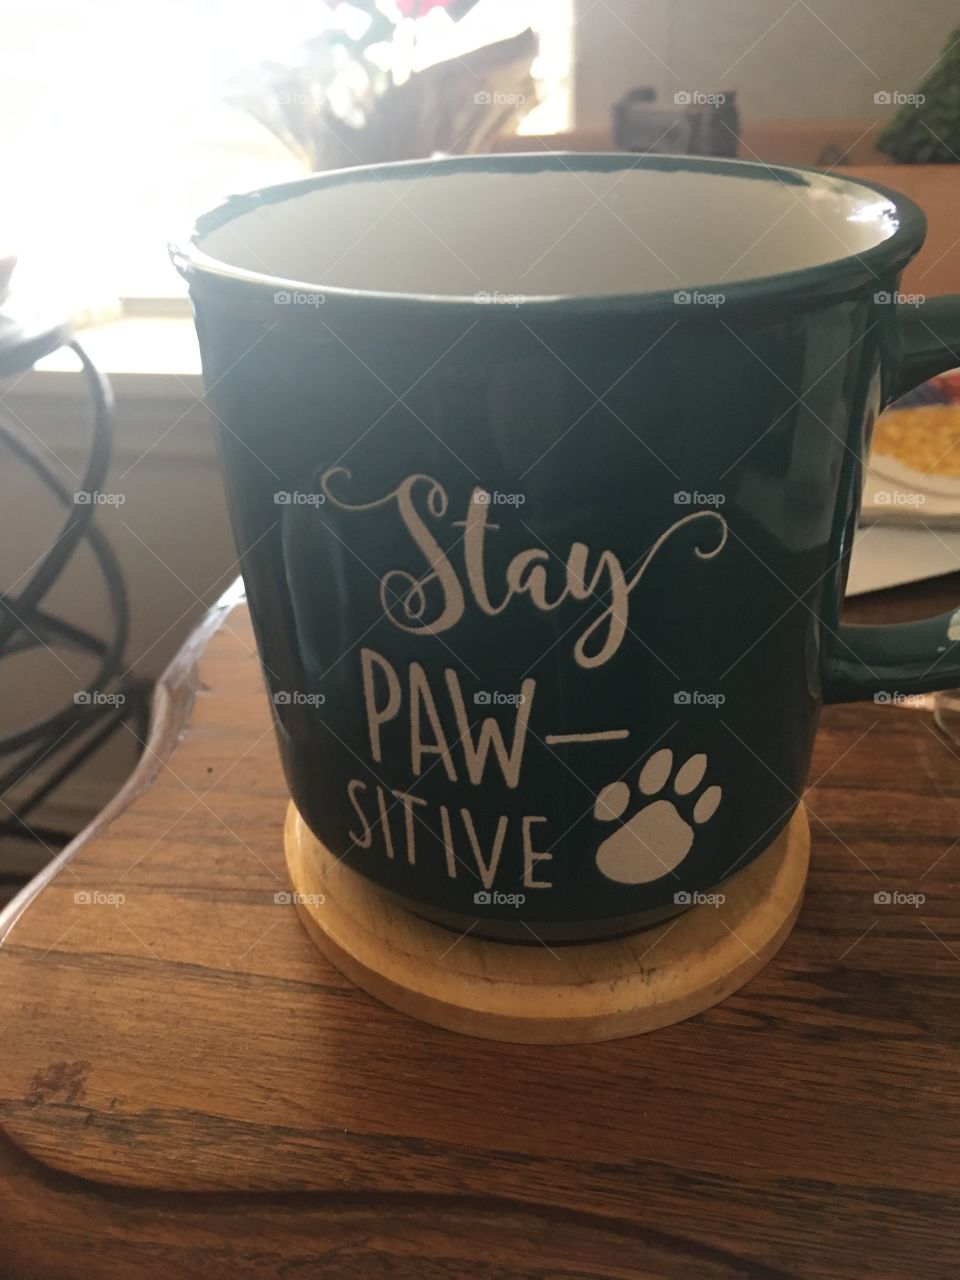 Went to the store to pick up a few dog and cat treats and found my new awesome coffee cup.